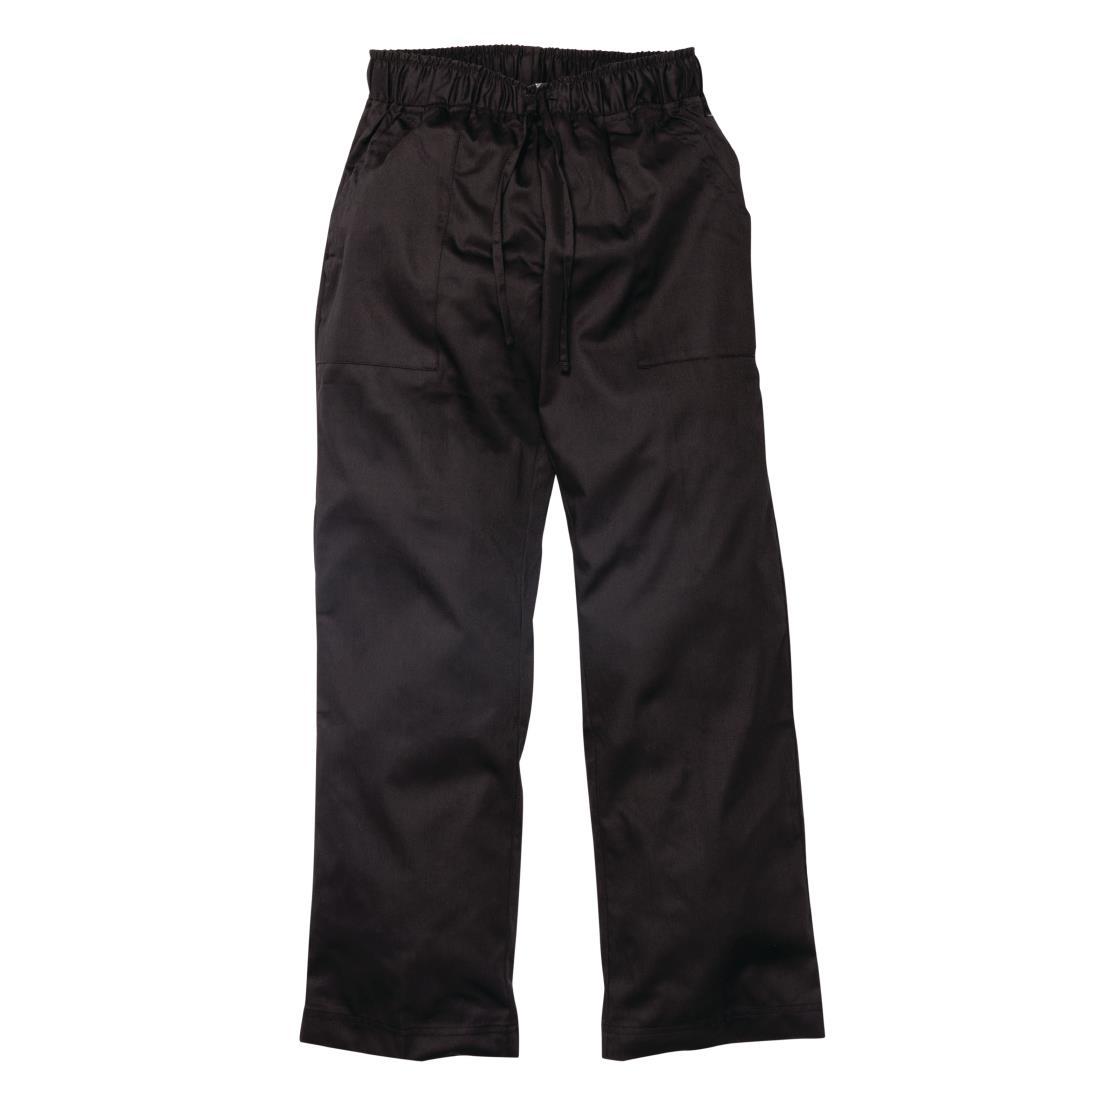 Chef Works Womens Executive Chef Trousers Black S - A431-S  - 2